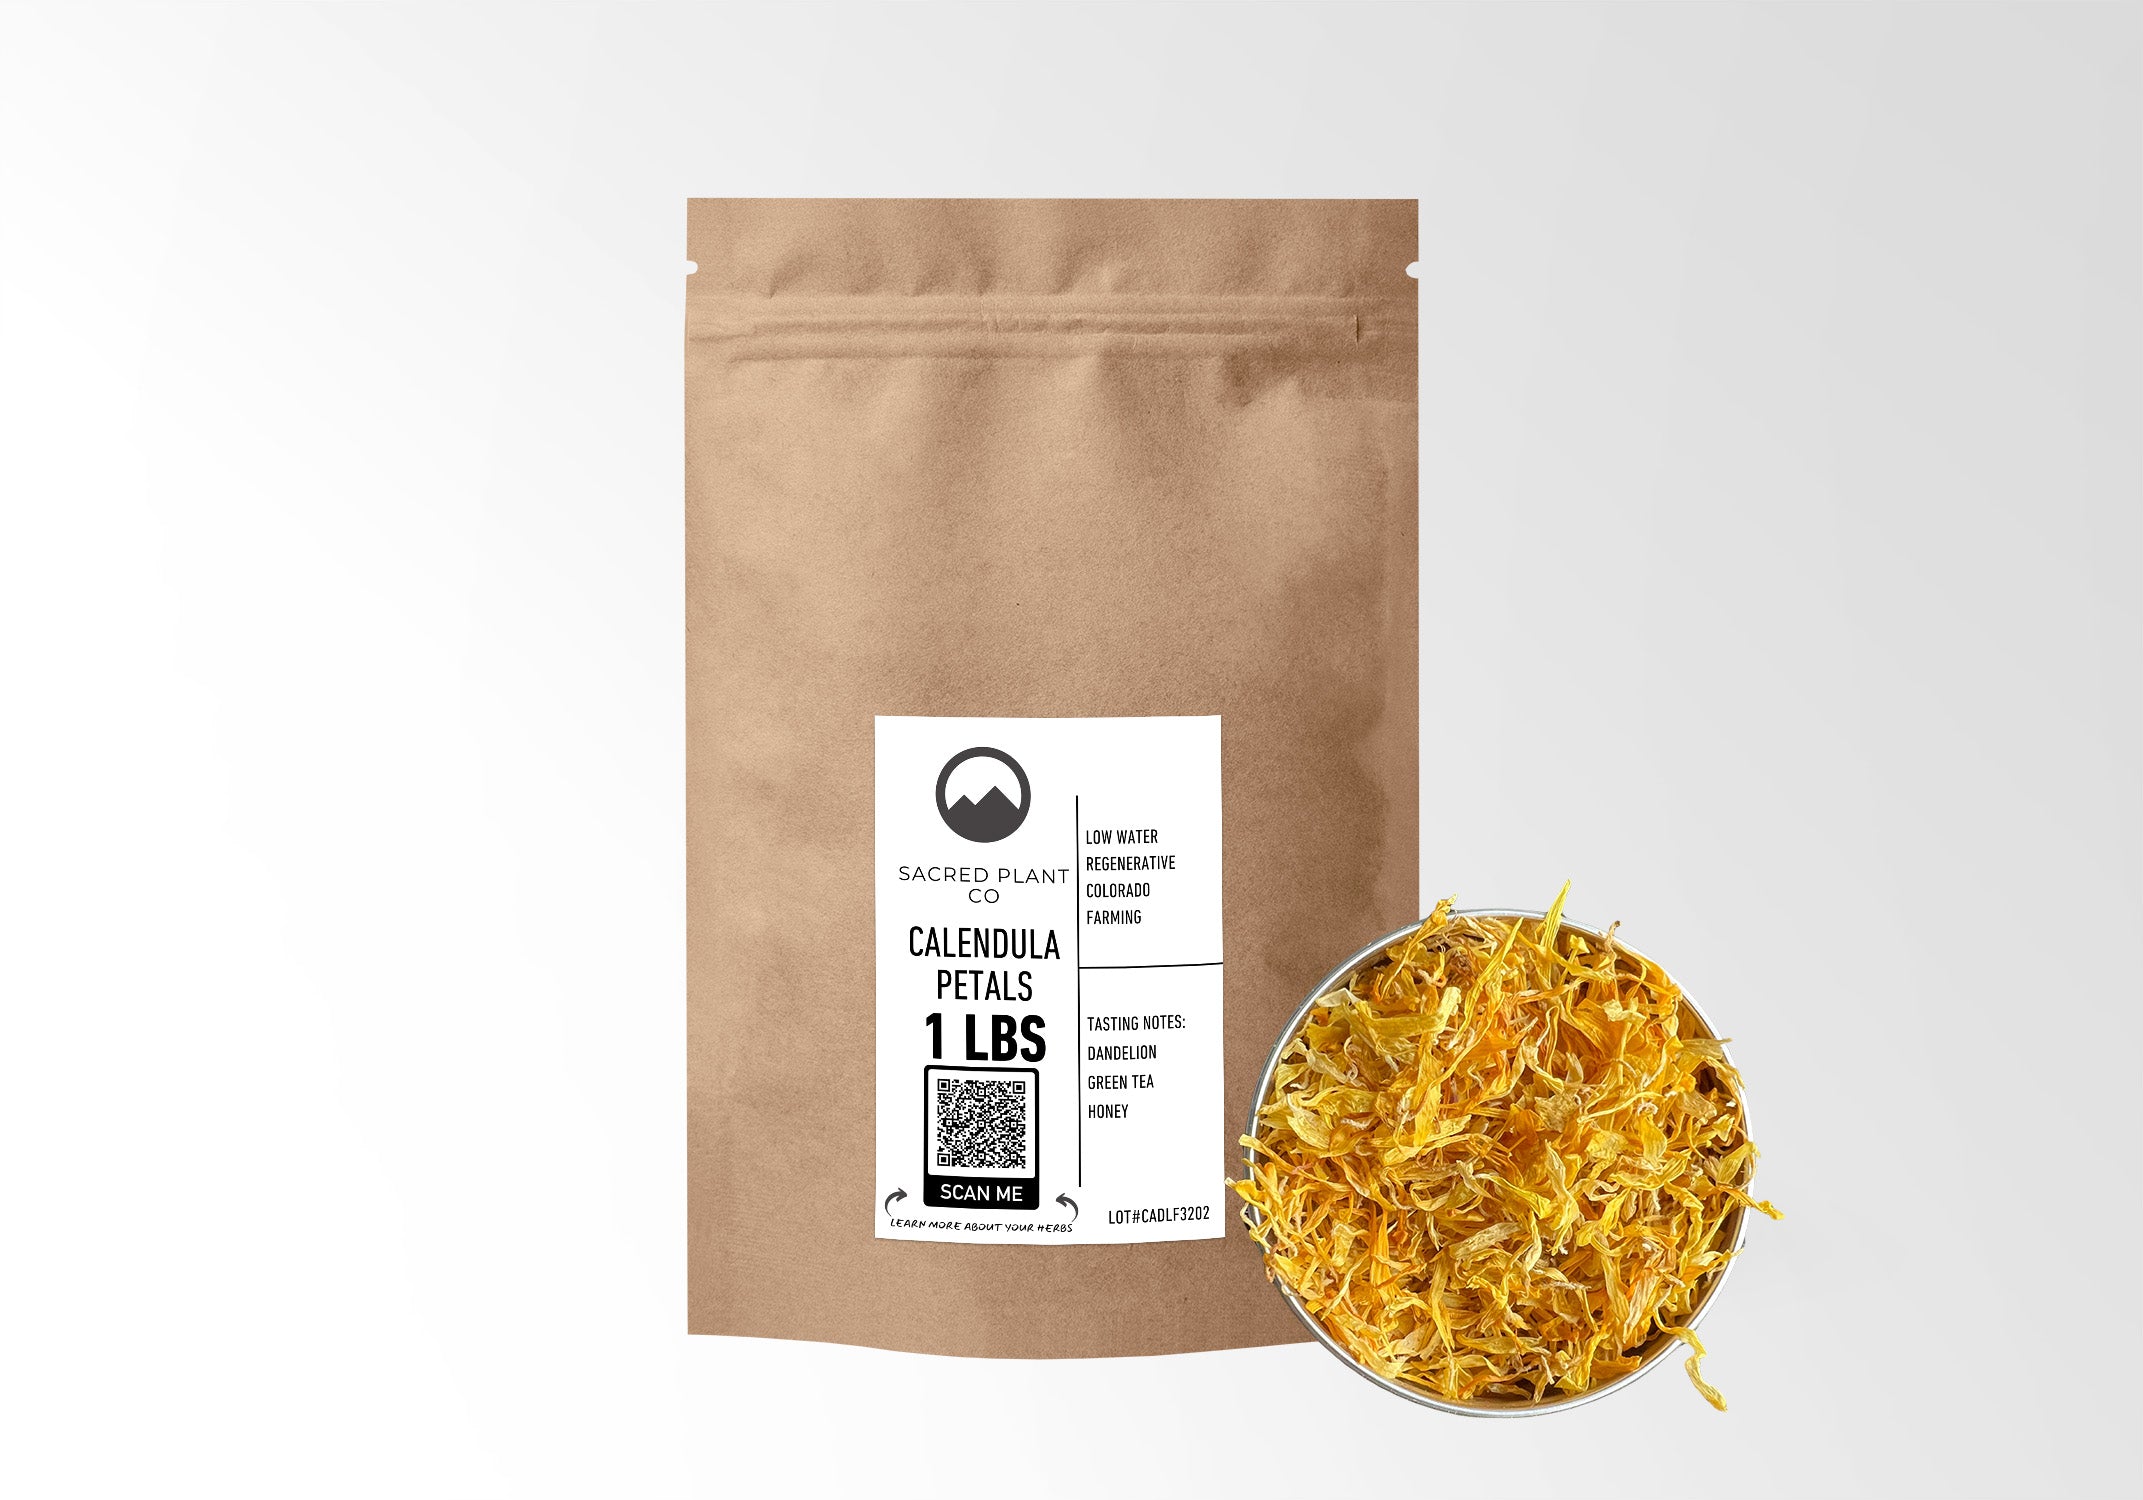 A one-pound premium kraft paper pouch labeled Calendula Petals, from Sacred Plant Co, is displayed next to a bowl brimming with rich, yellow calendula petals. The upscale packaging and the plentiful petals highlight the premium nature of the product, with a focus on its high quality.